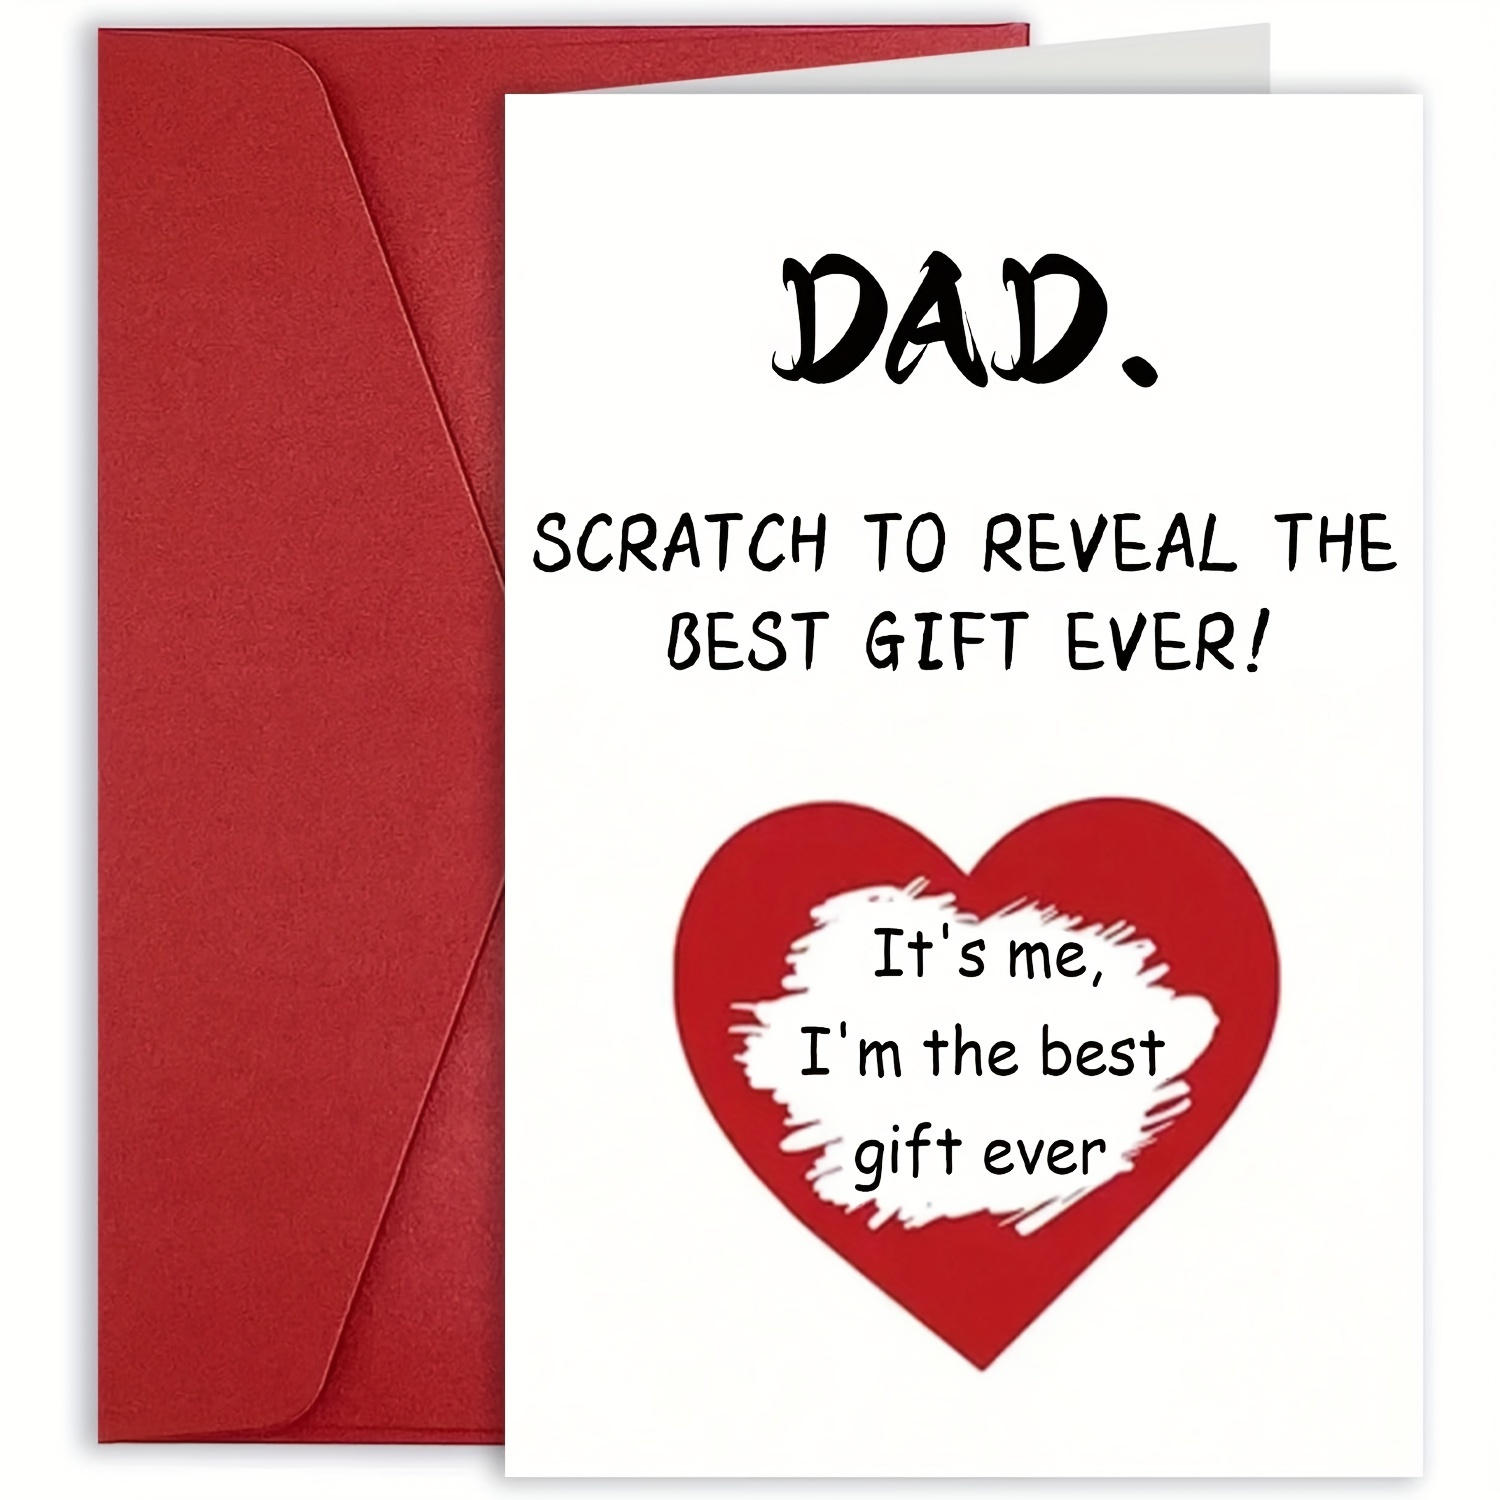 

Versatile Greeting Card Set For Father's Day, Mother's Day & More - Includes Envelopes, Funny & Creative Cards For Dad, Brother, Friends - Perfect For Birthdays, Anniversaries & Special Occasions